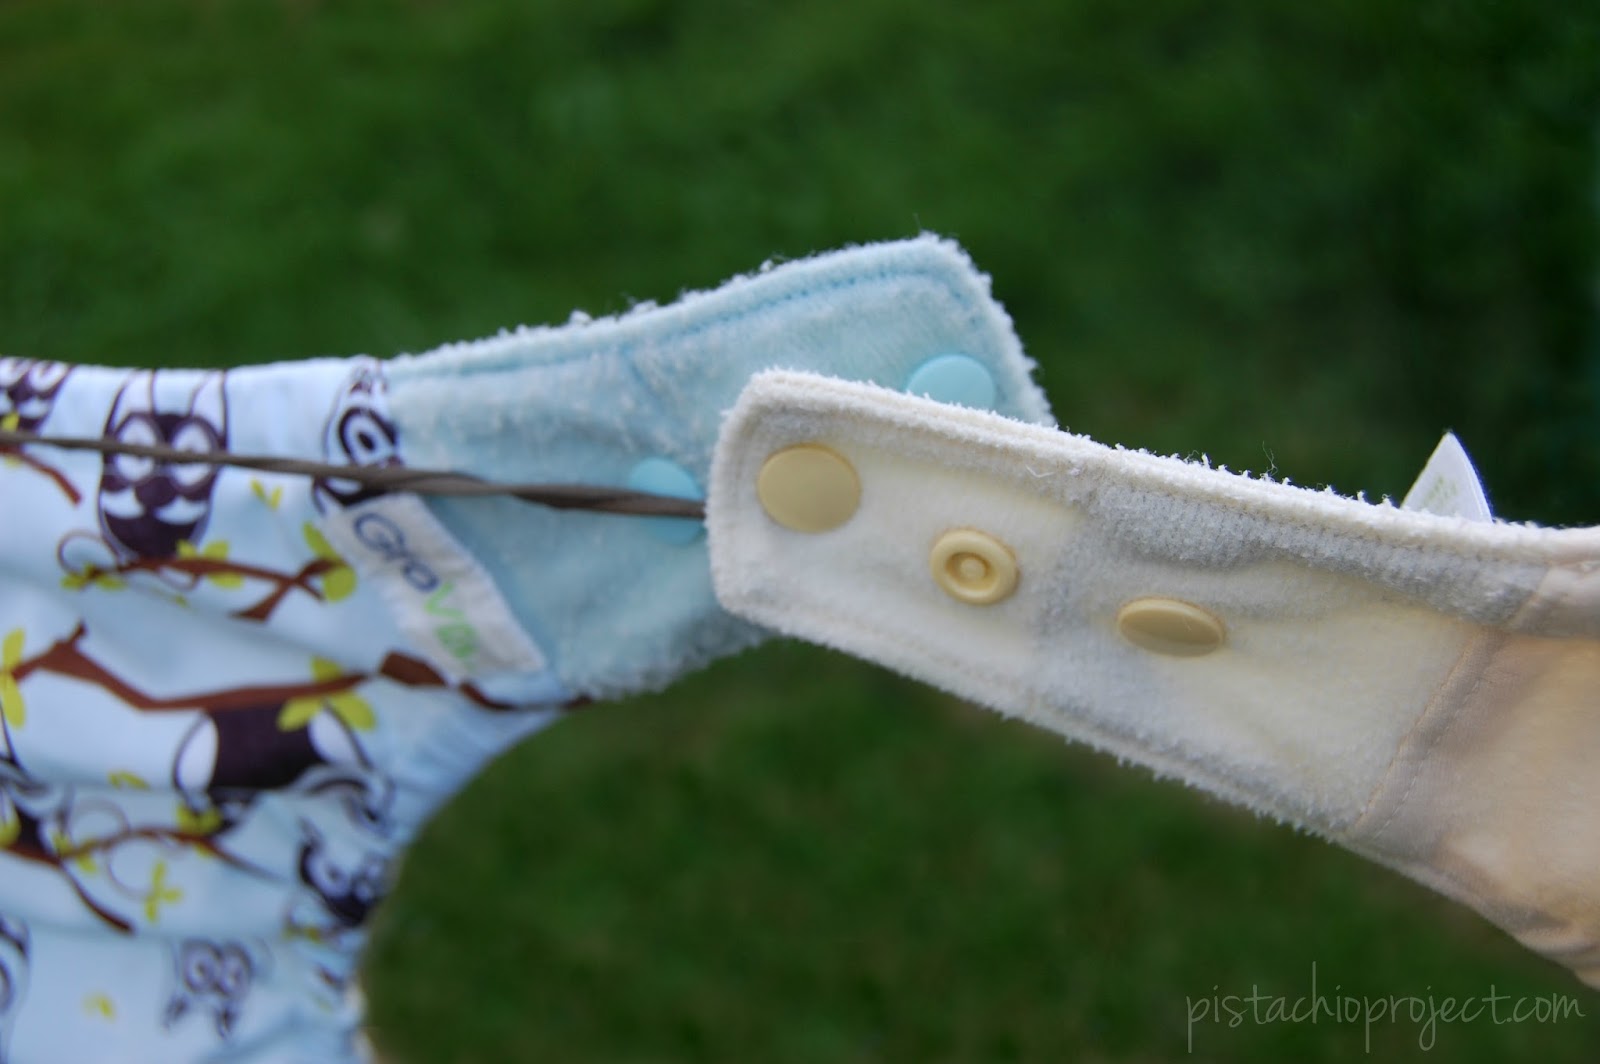 An Easy Way to Line Dry Diapers - line dry diapers with just two clothes pins!